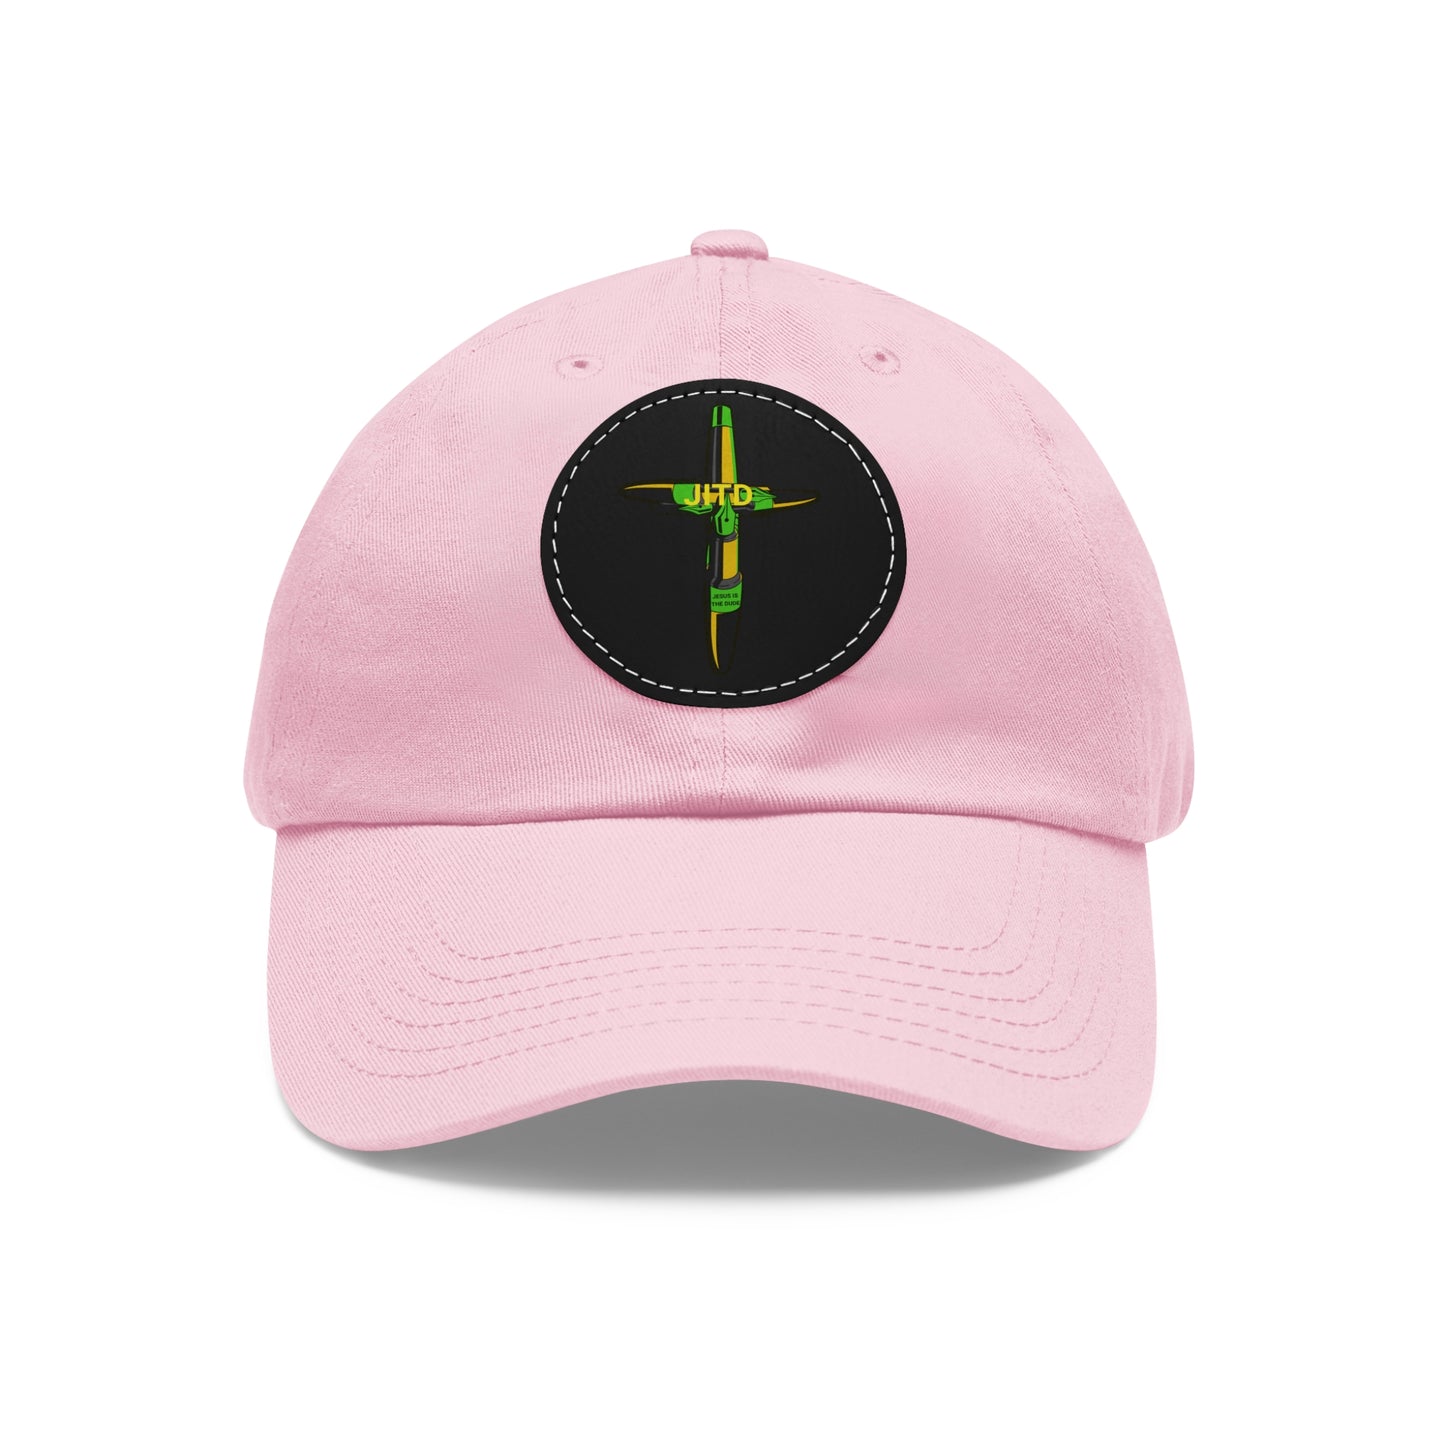 JITD PEN CROSS HAT WITH LEATHER PATCH